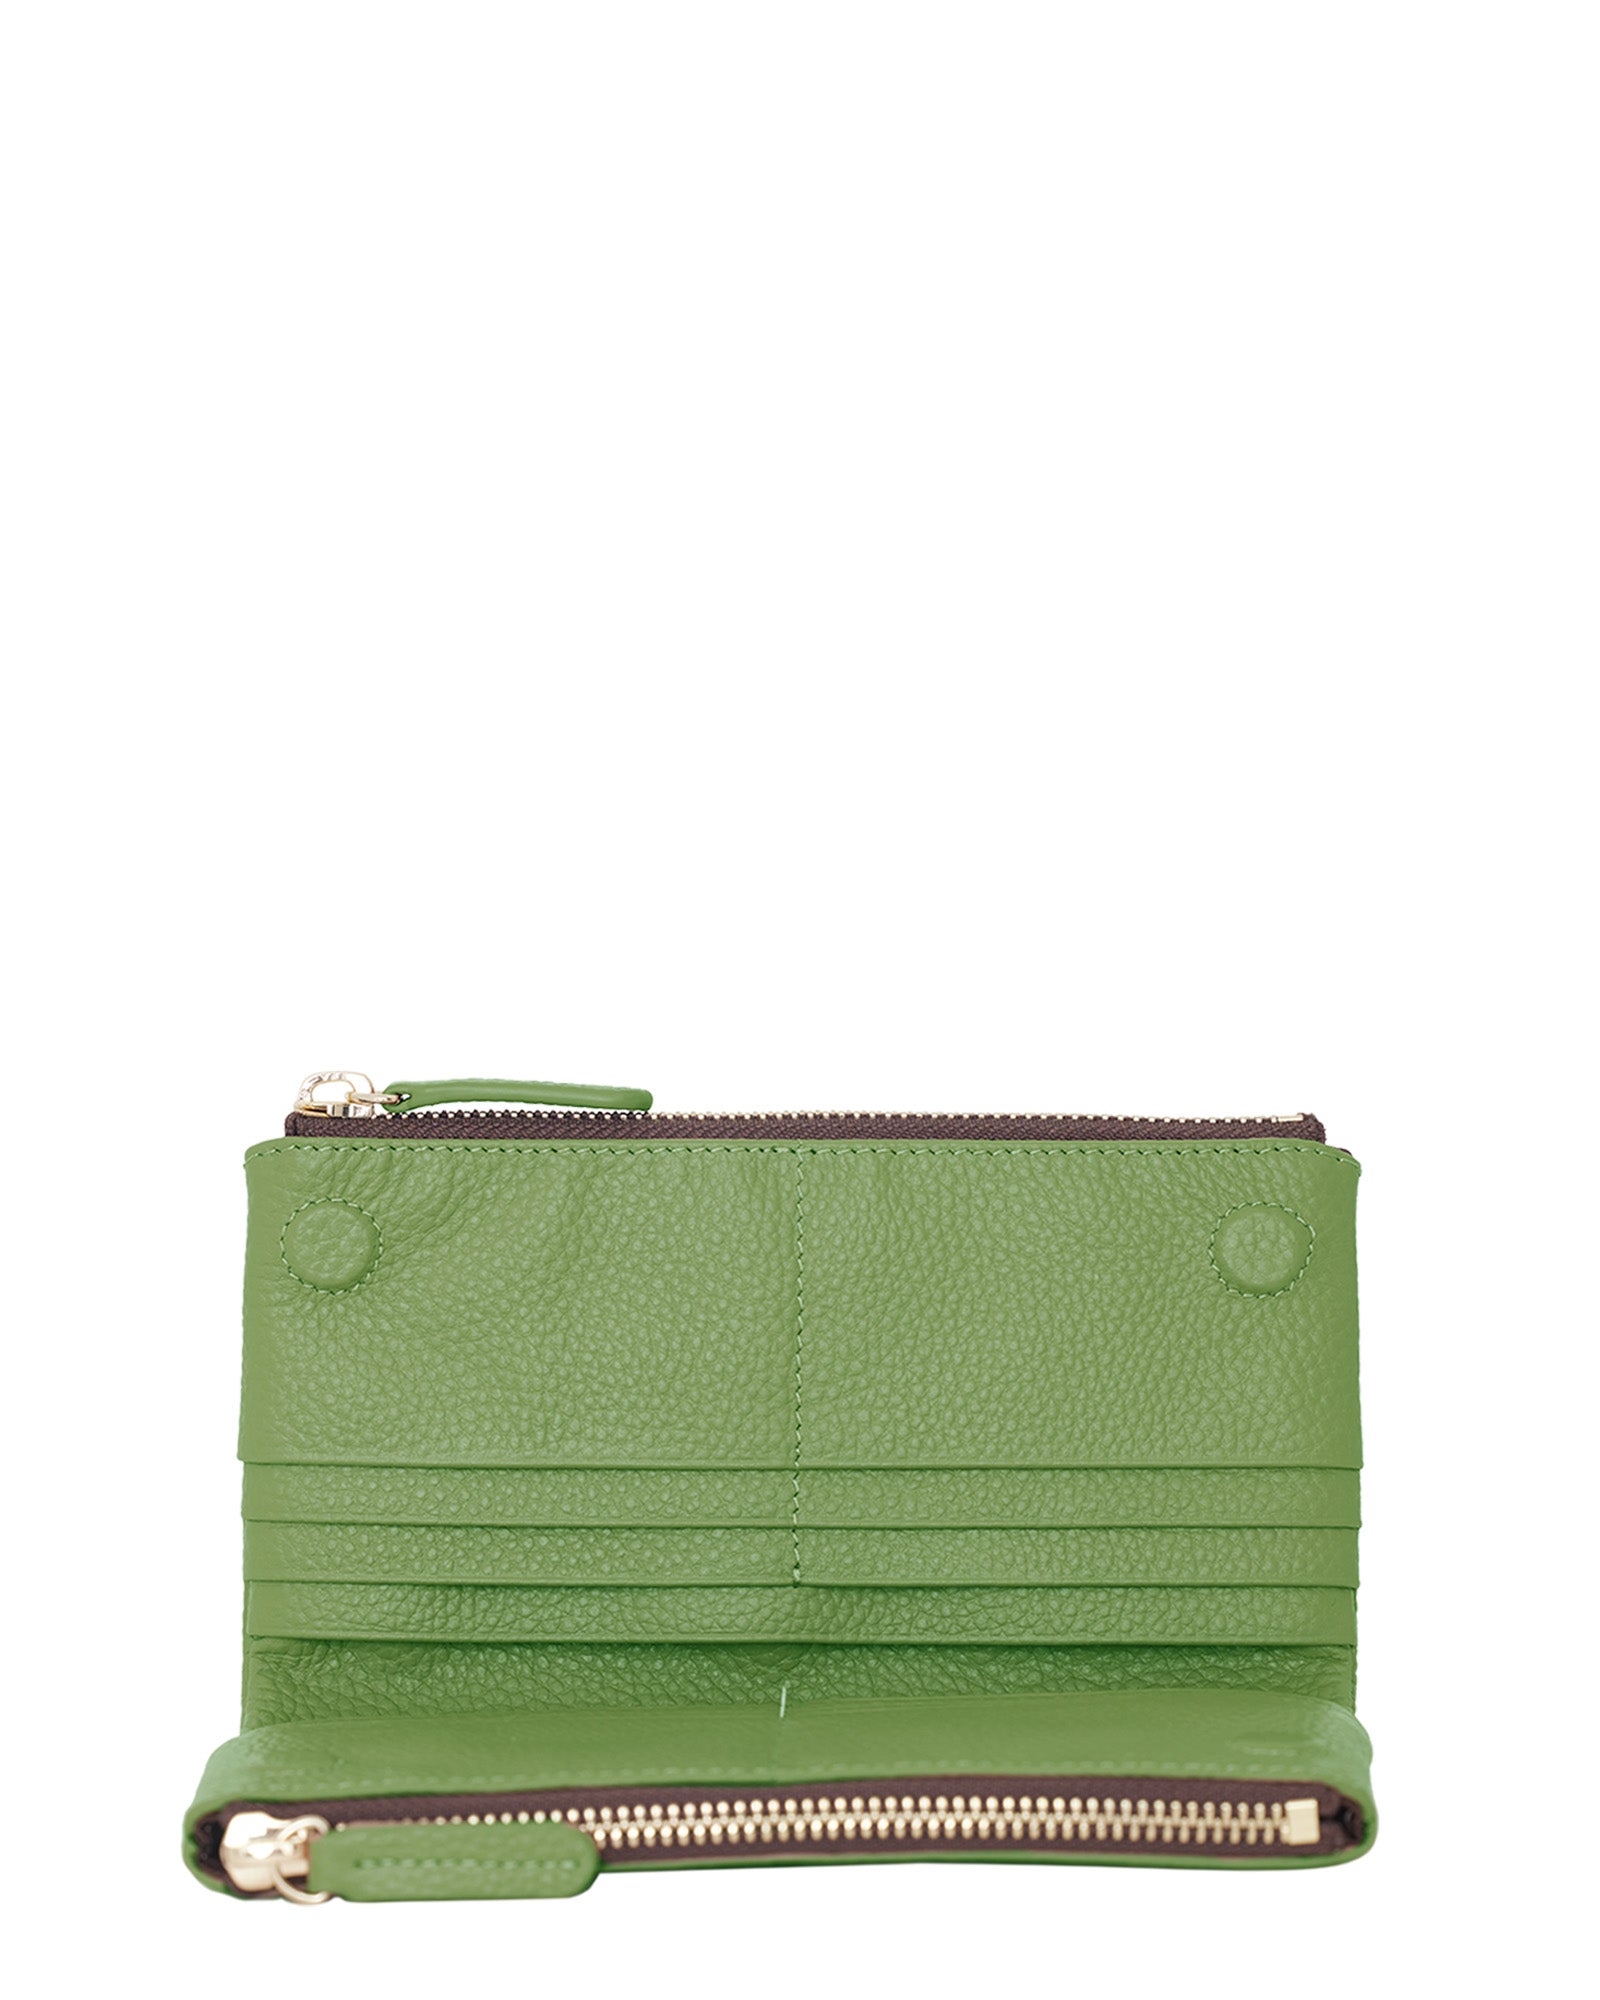 Sam Wallet | Saben | Luxury Leather Handbags and Accessories